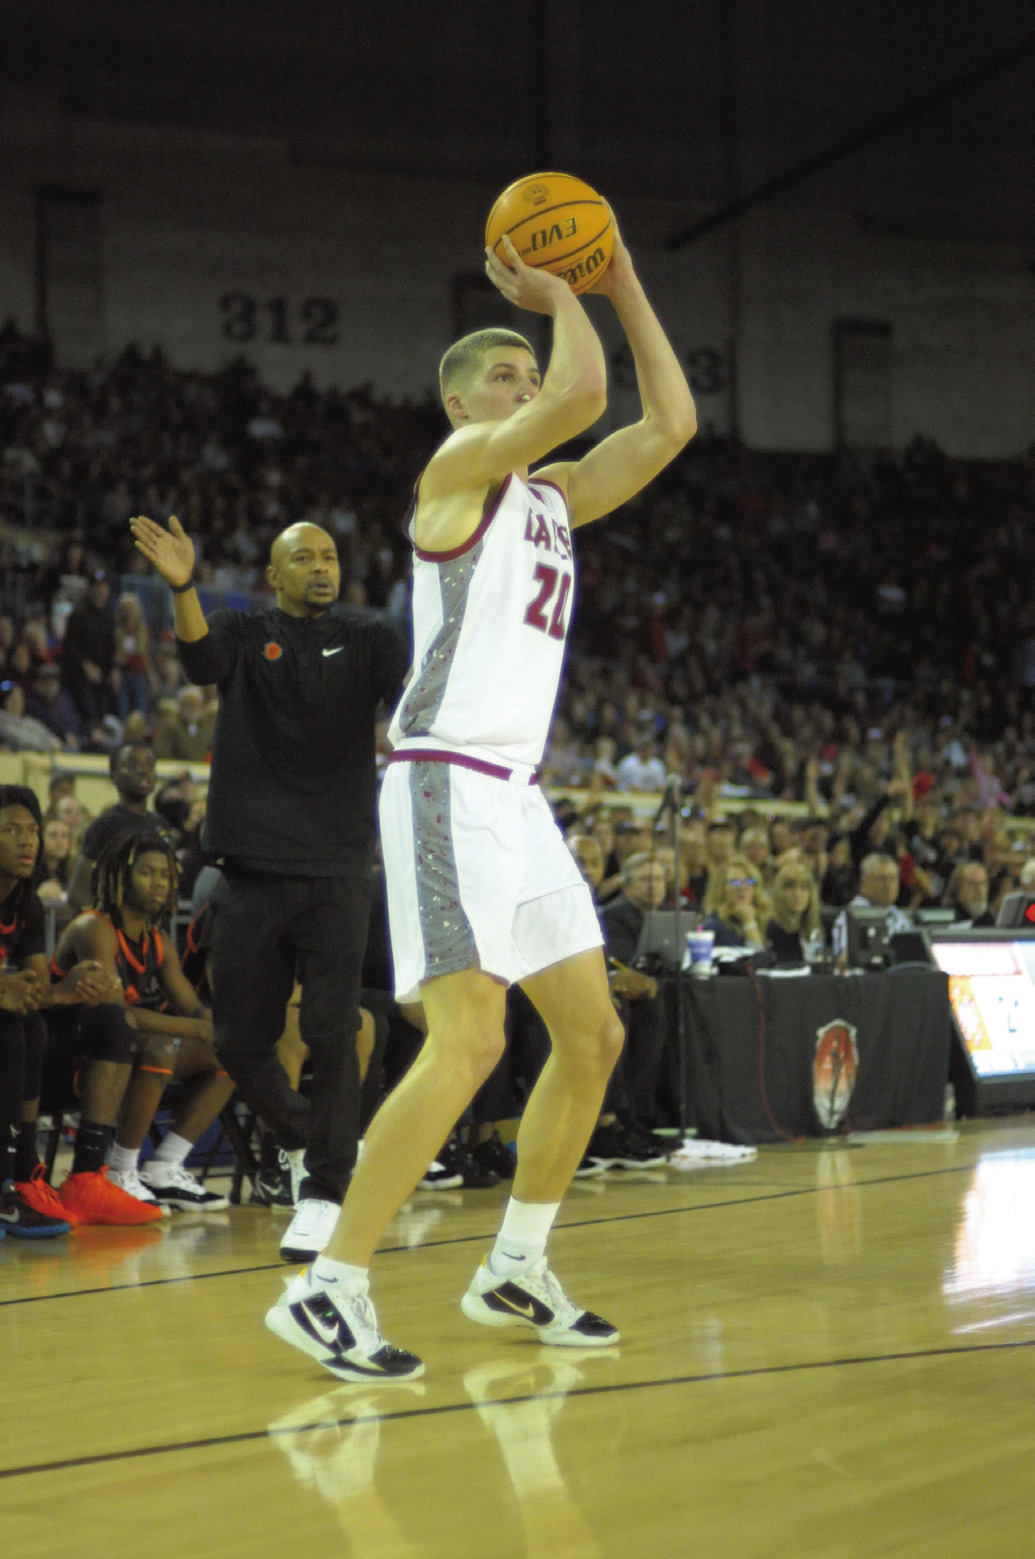 Nate Reherman takes a three-point shot in his final game as an Eagle. He finished with 13 points. Josh Burton/WDN